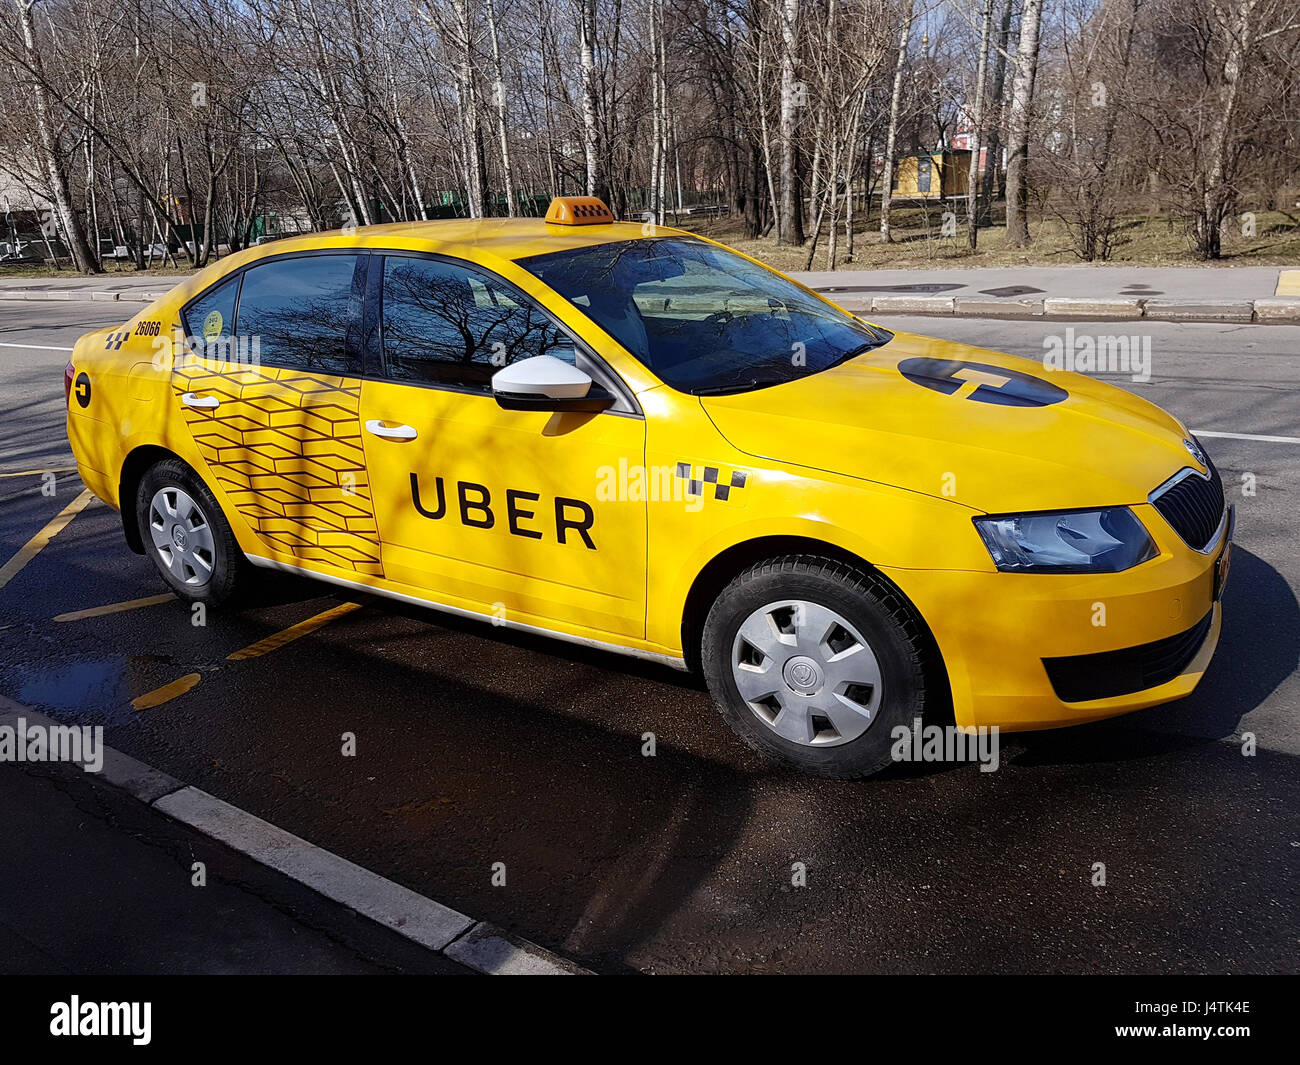 New yellow taxi with Uber logo Stock Photo